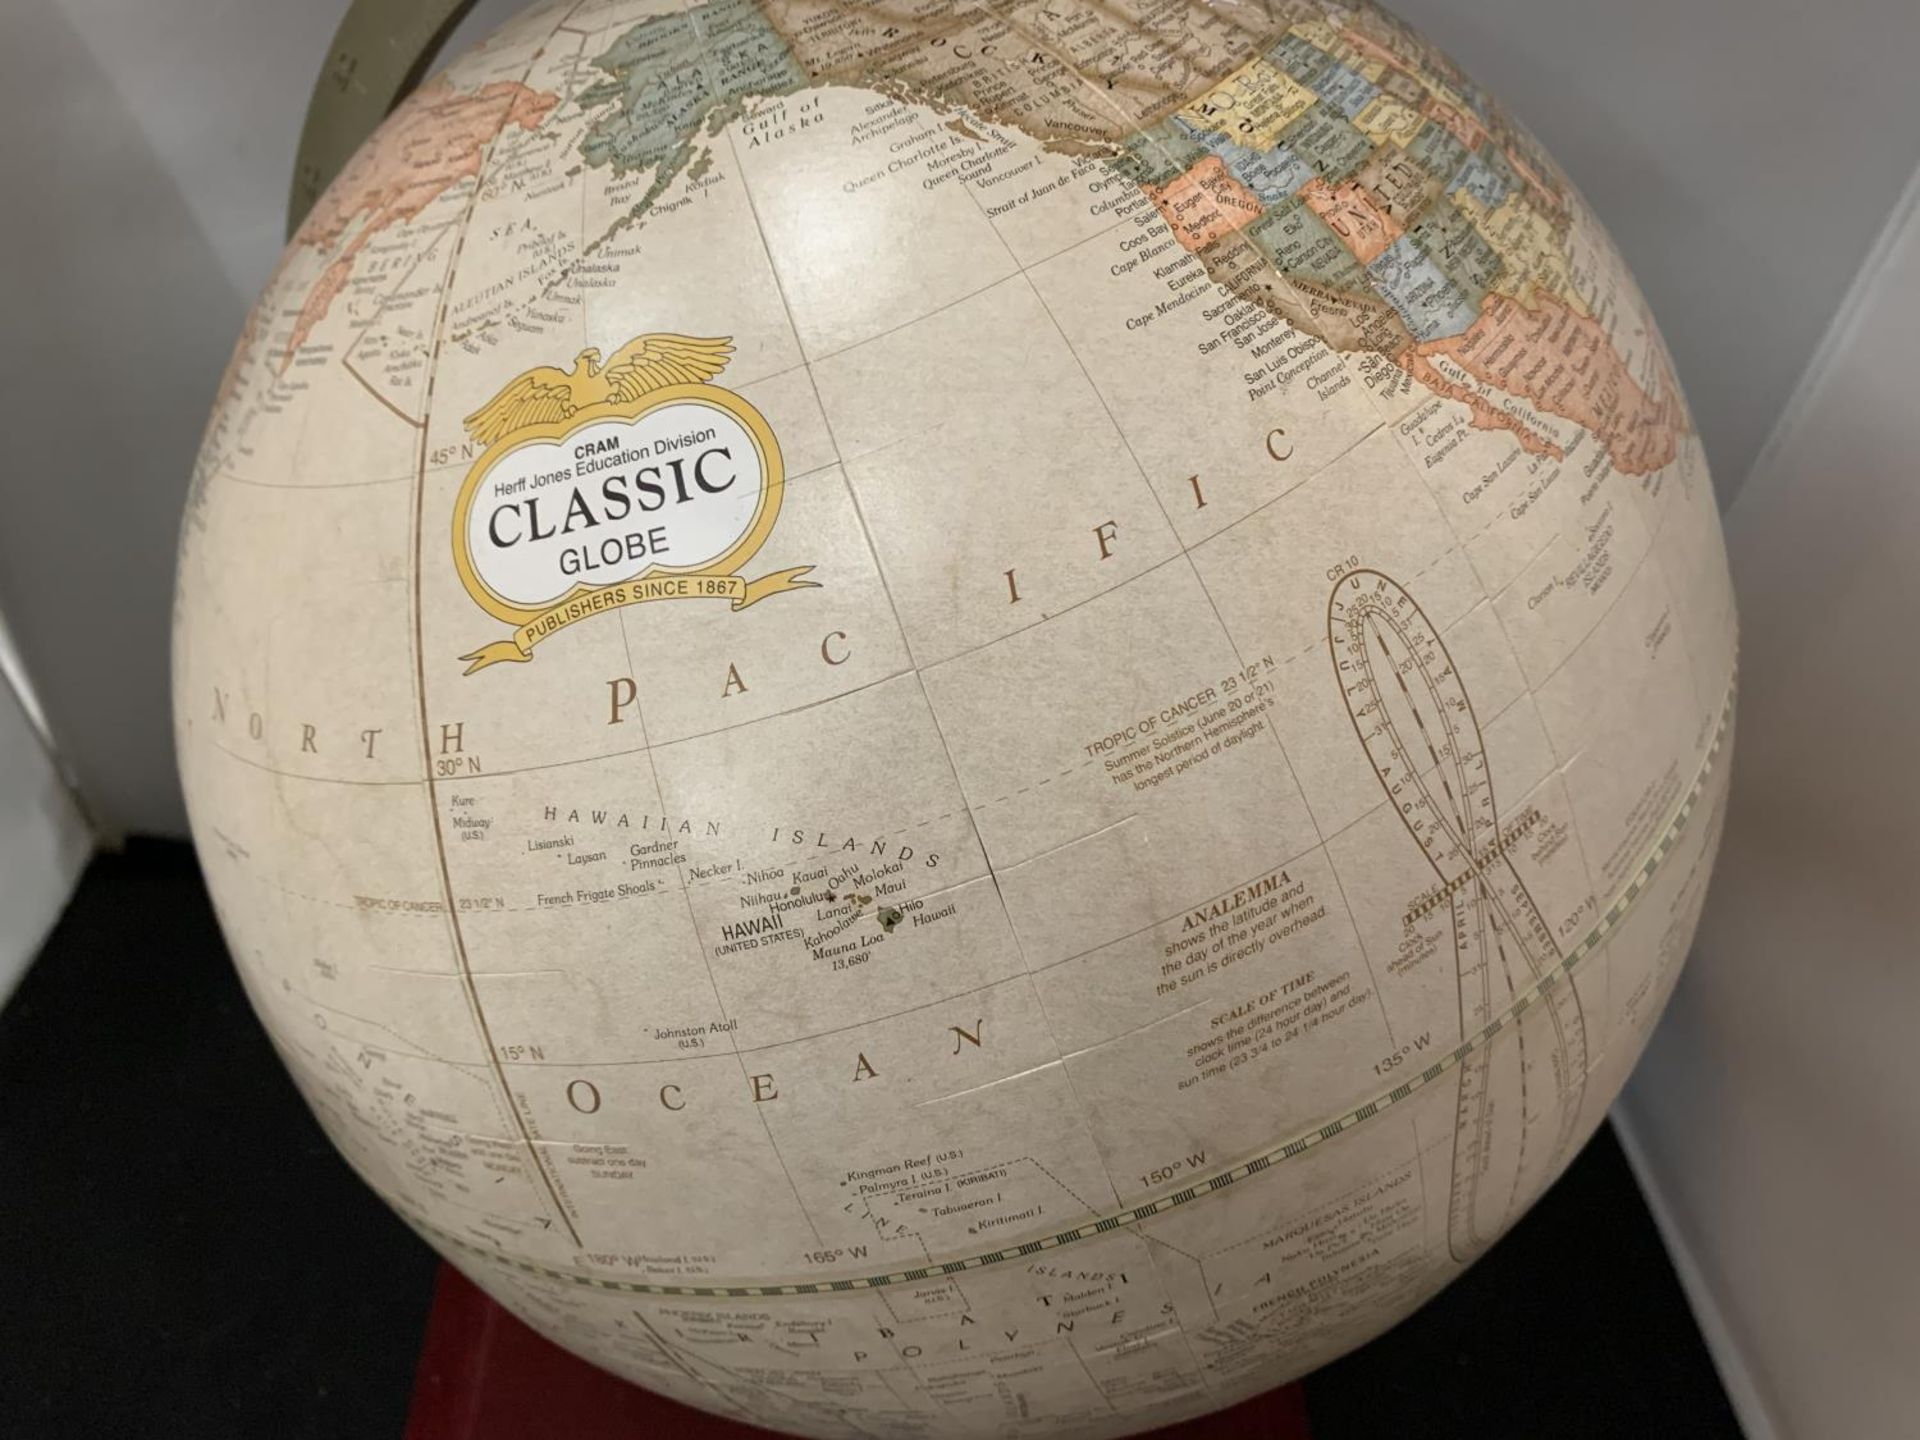 A HERFF JONES EDUCATION DIVISION CLASSIC GLOBE CIRCUMFERENCE 96CM - Image 2 of 4